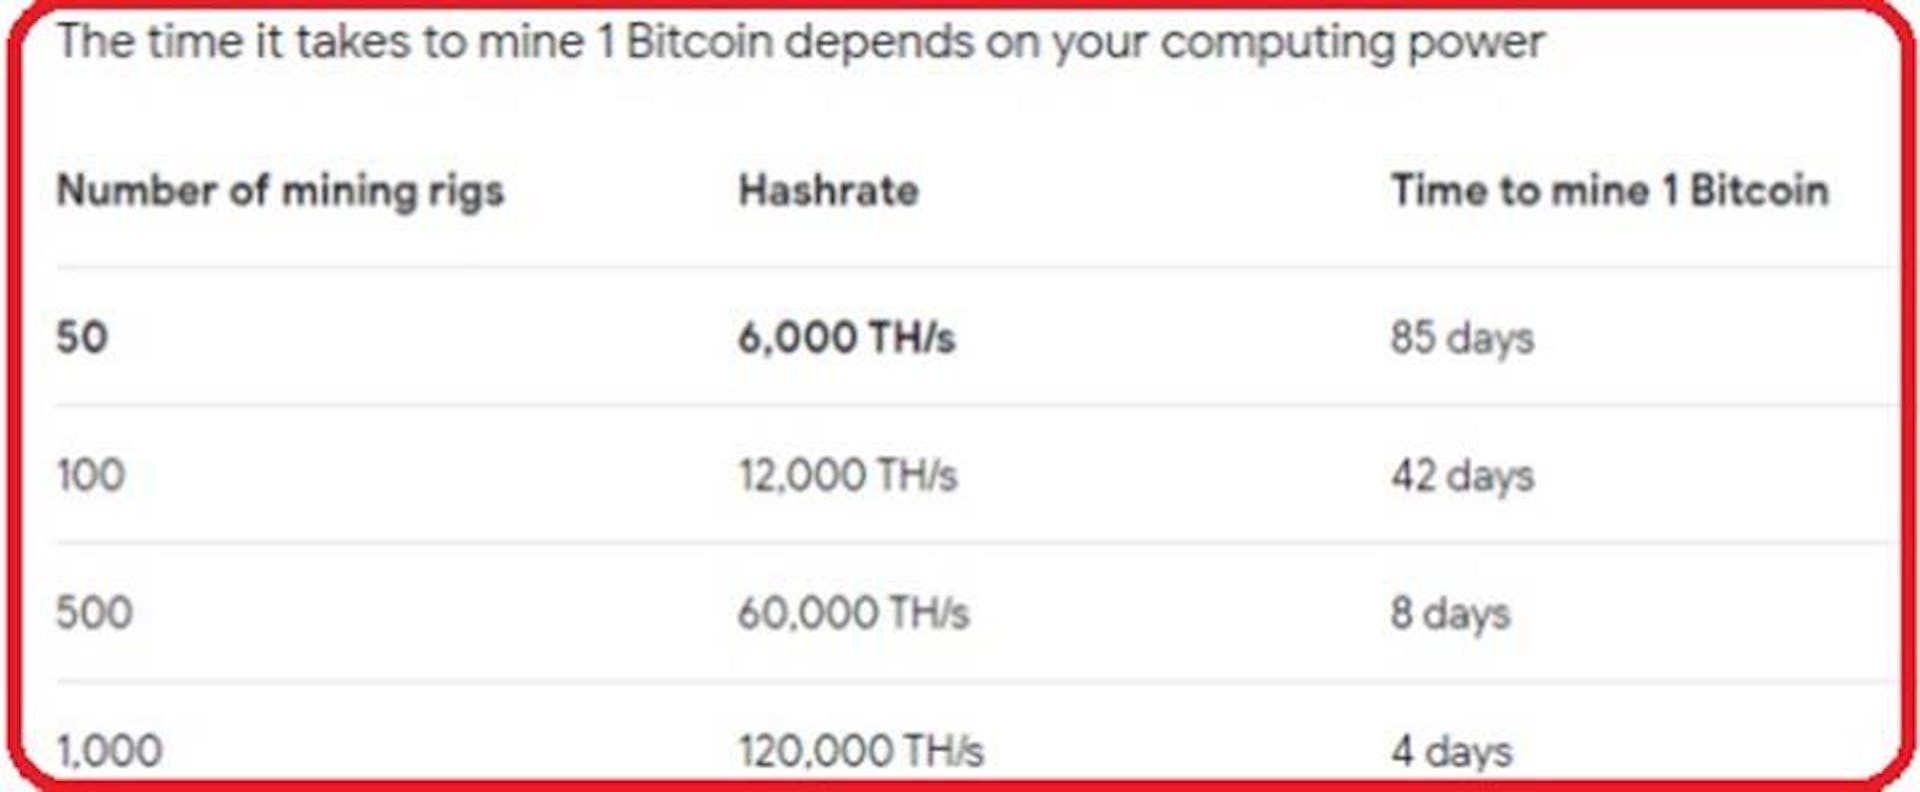 More hash power will mine BTC faster